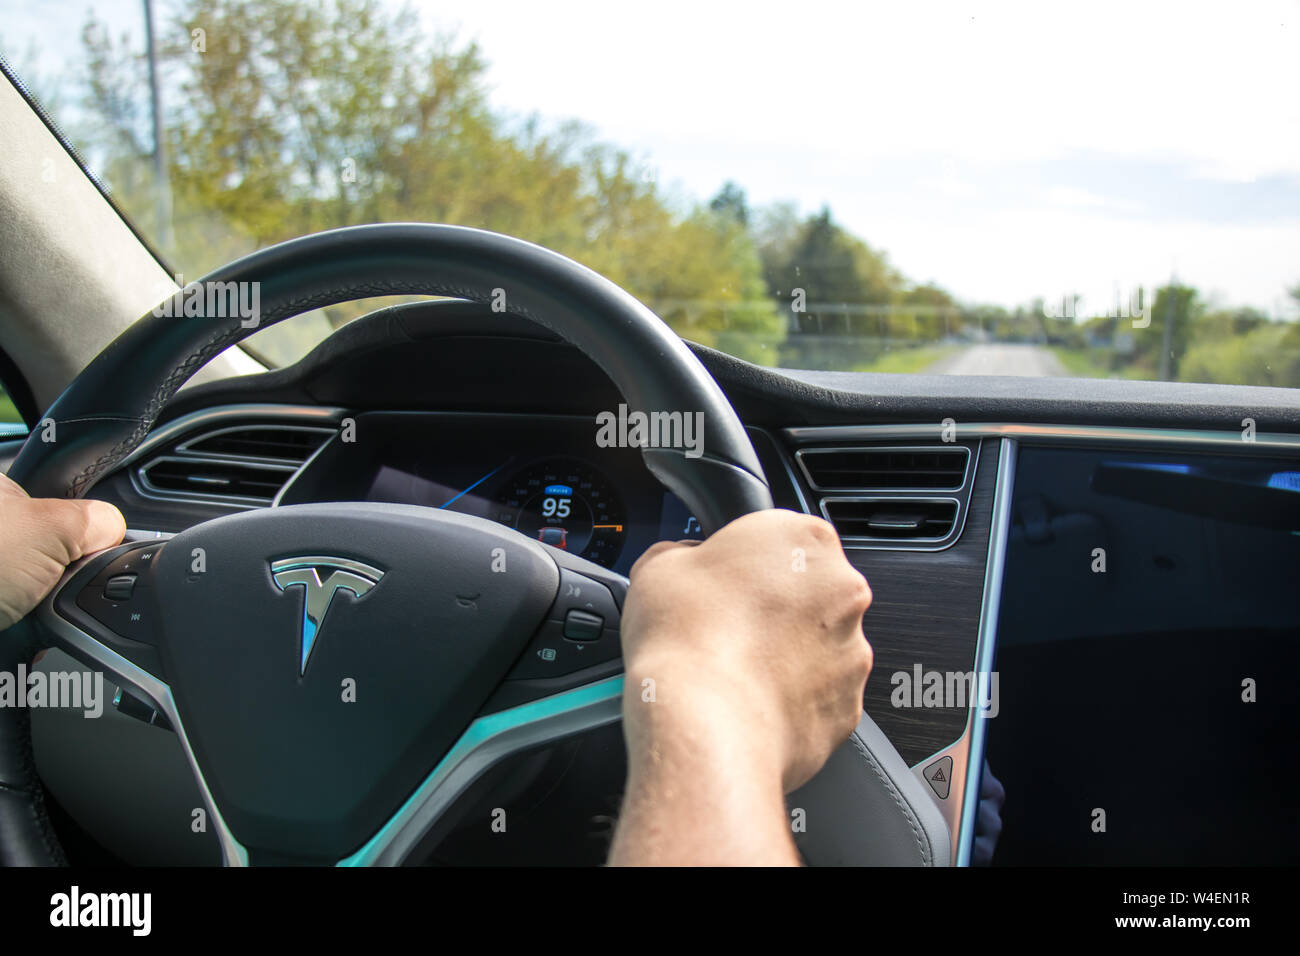 Man Driving Tesla Model S Interior Covered In Black And